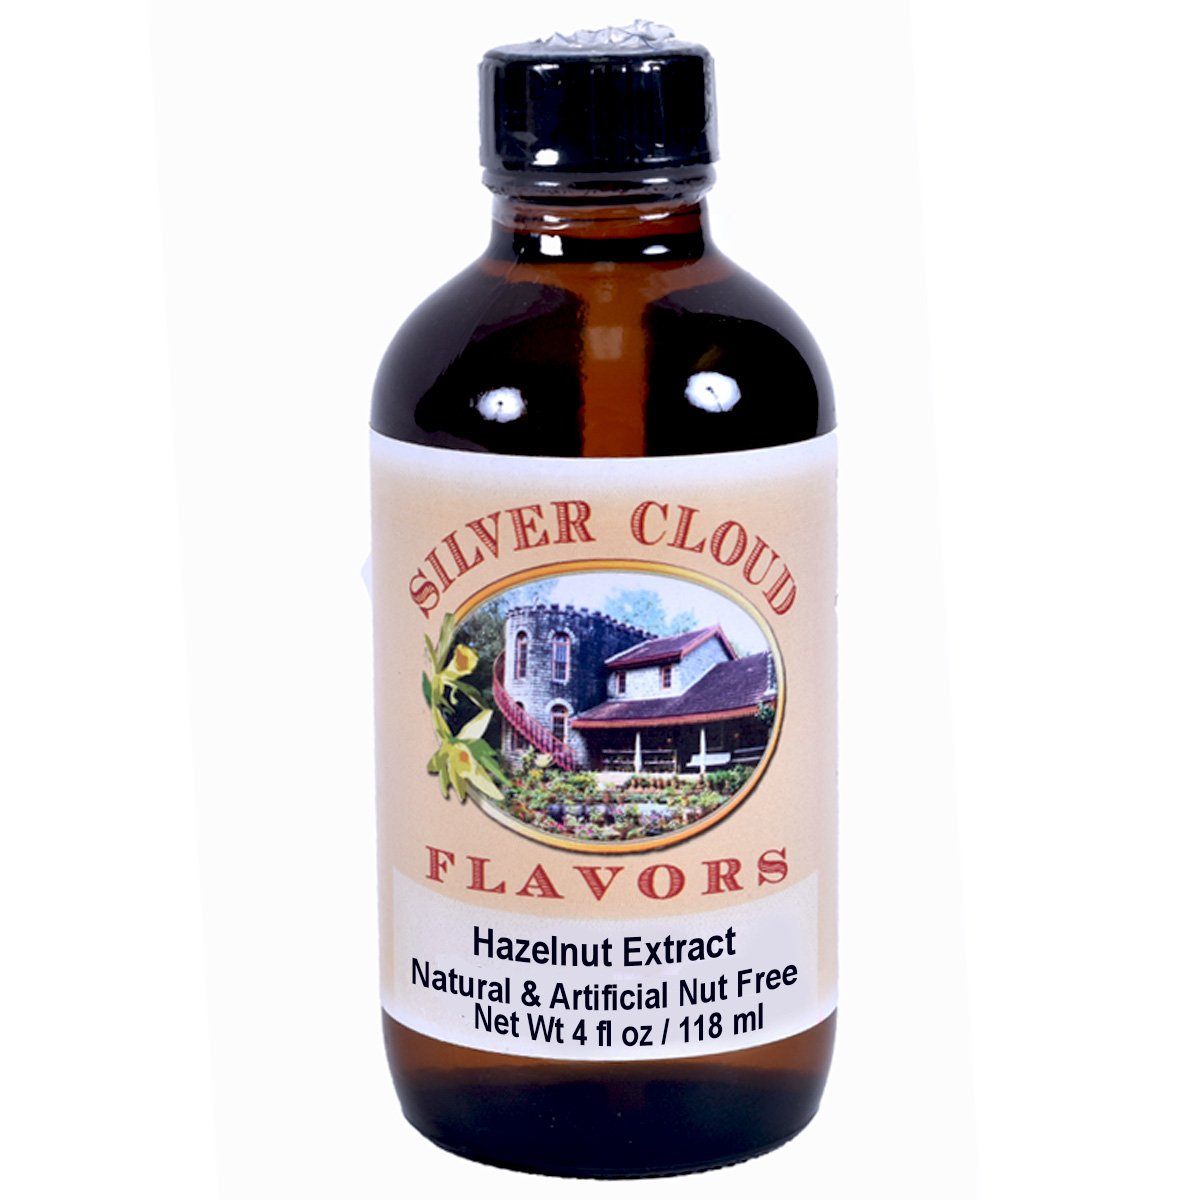 Hazelnut Extract, Natural & Artificial - Nut Free Silver Cloud Extract - Bake Supply Plus